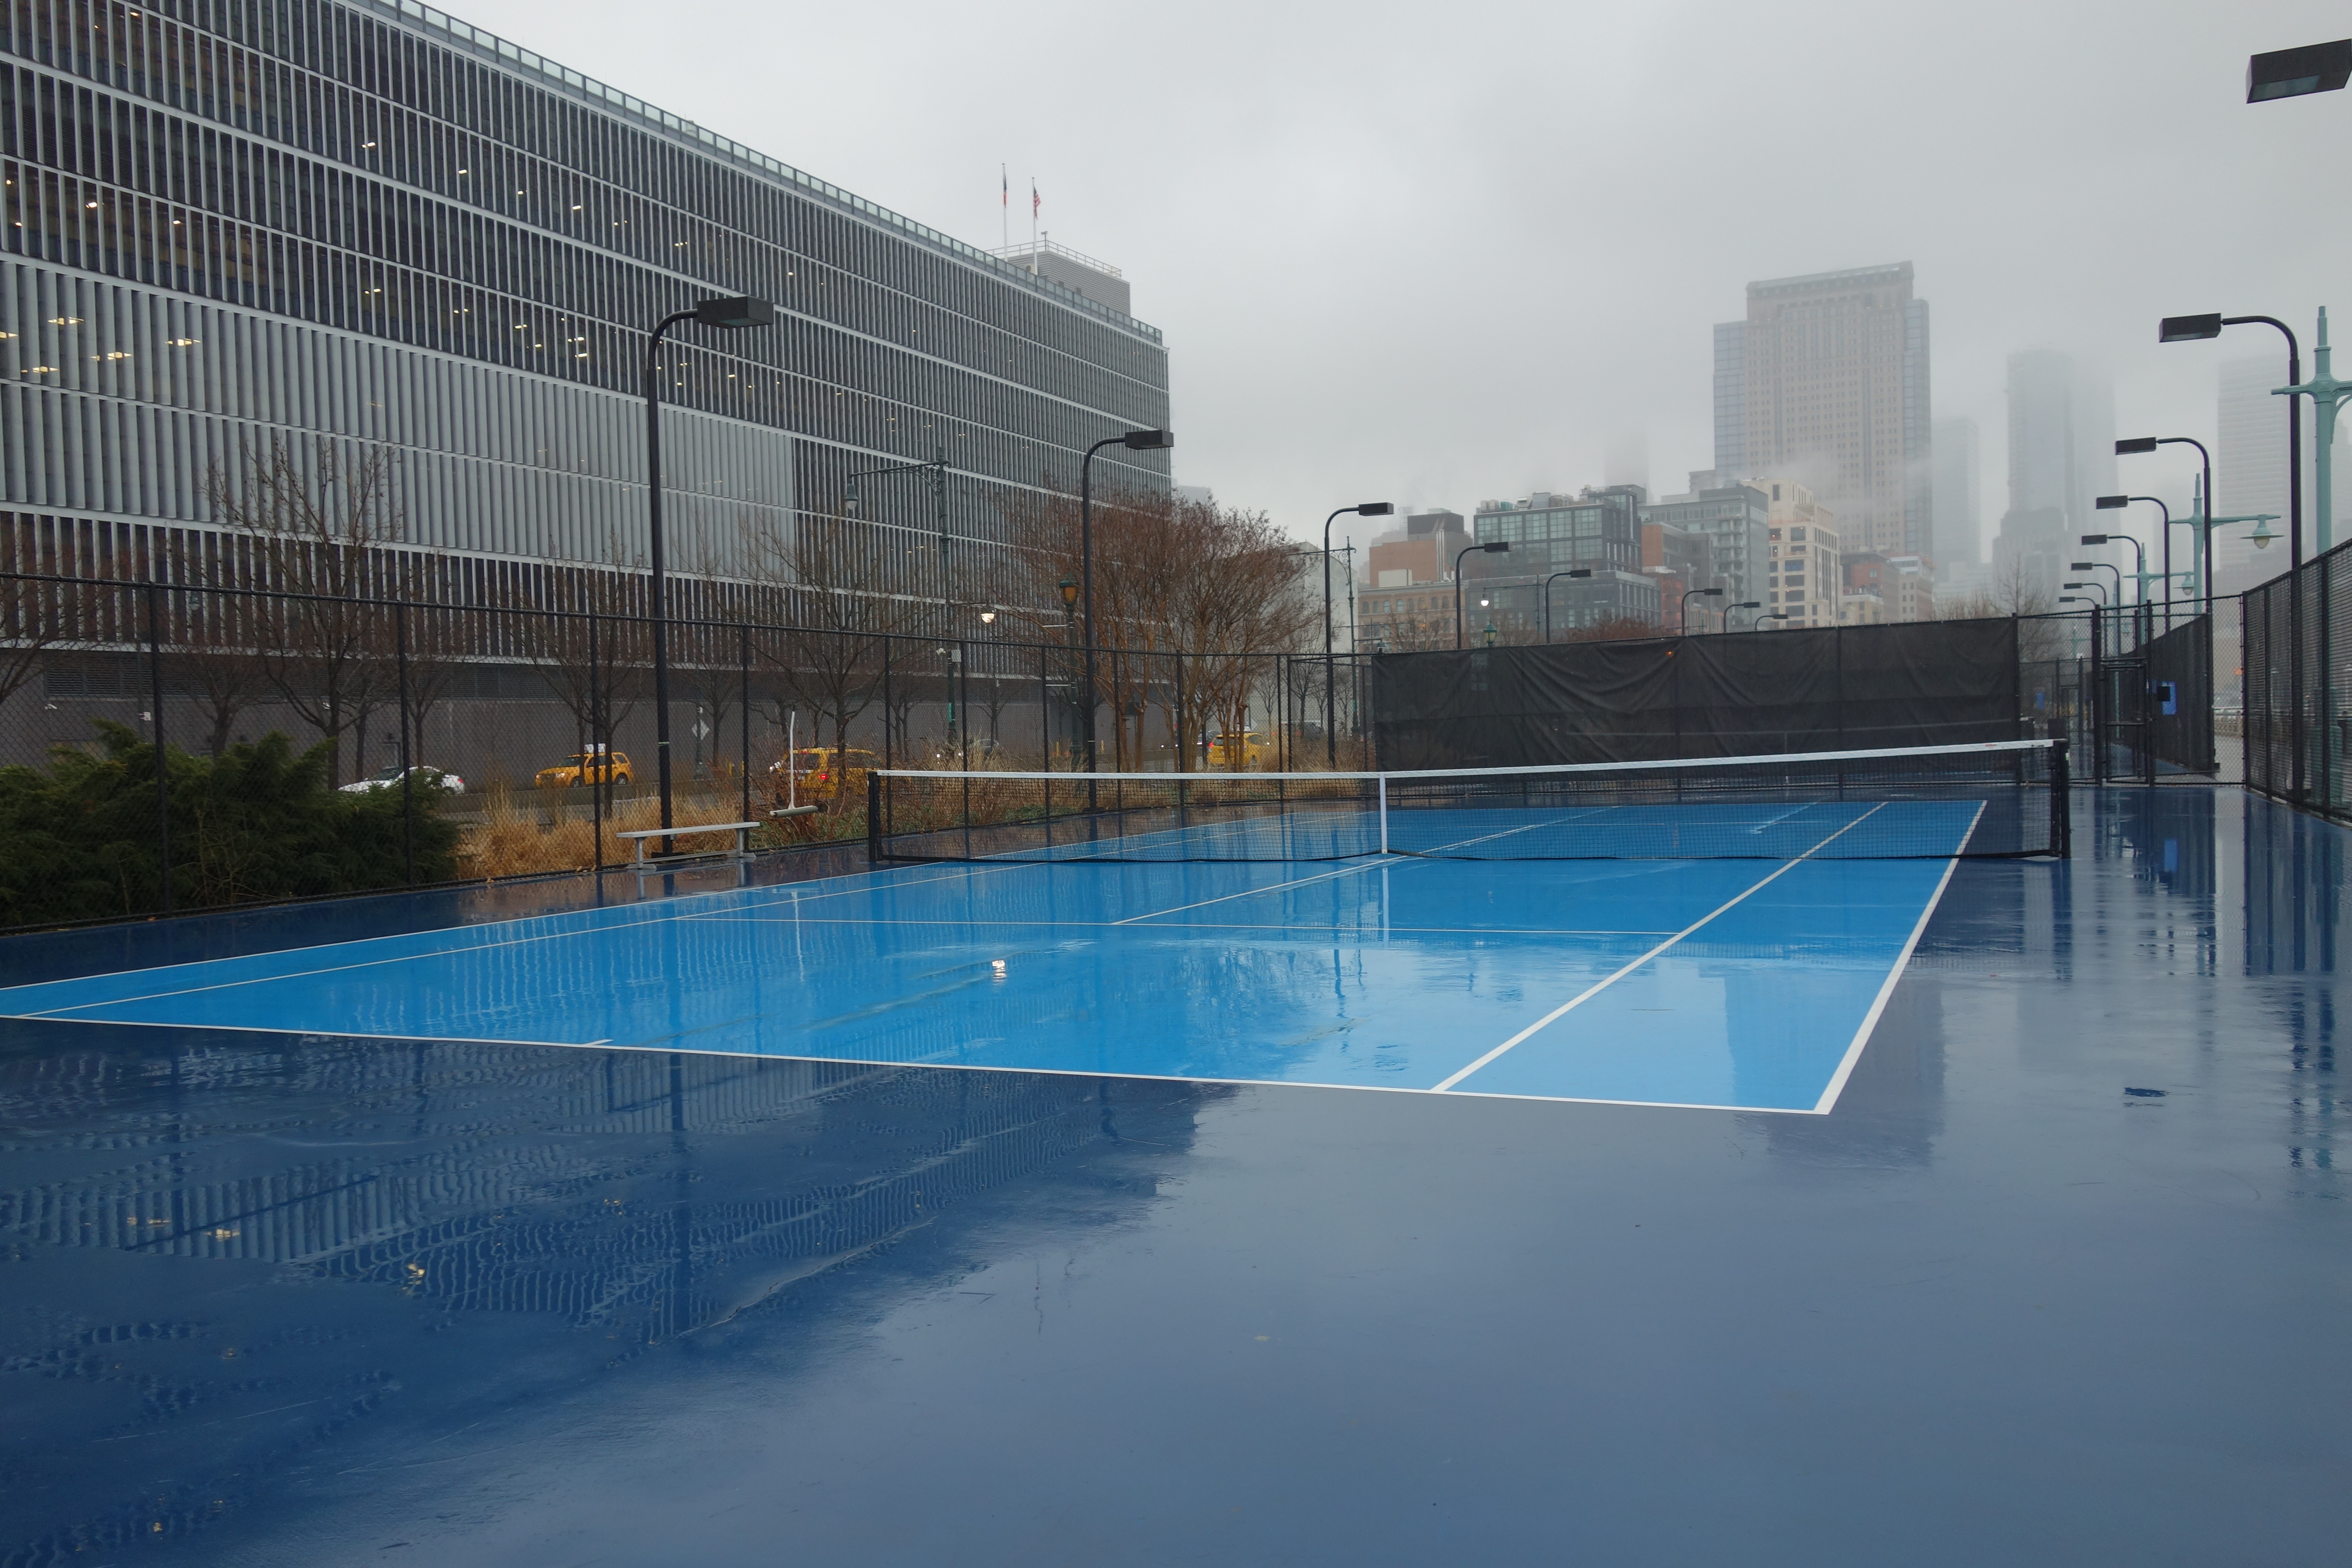 Park (2018-04-03) 16 - Tennis Courts.jpg - Wikimedia Commons